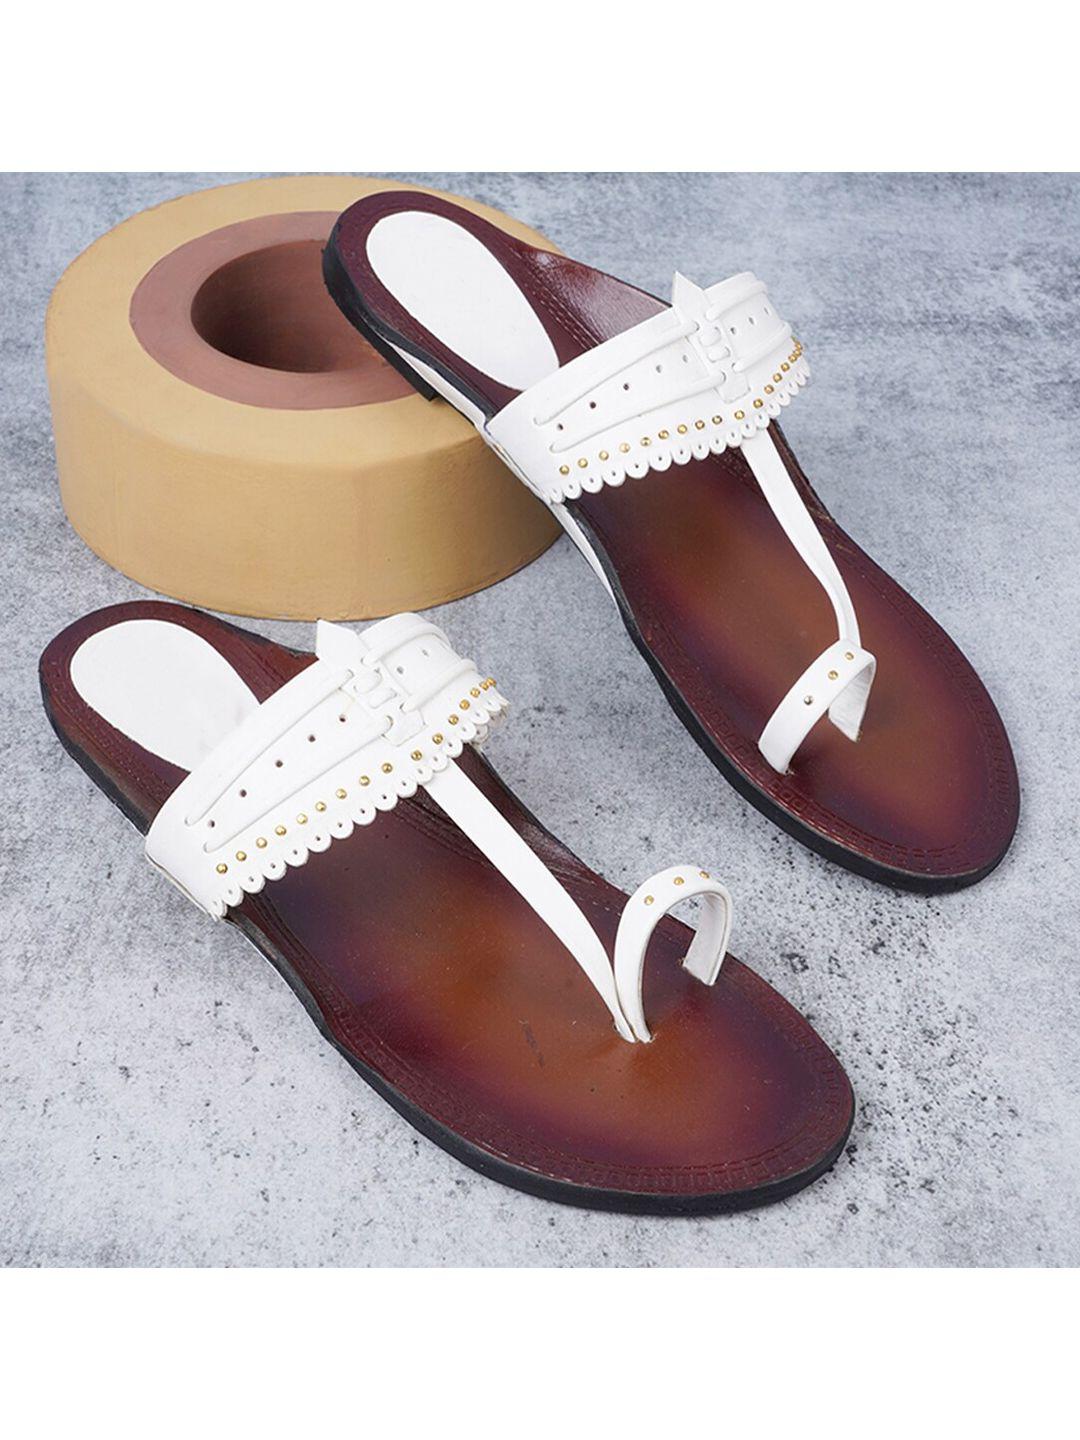 style shoes women white ethnic laser cuts flats